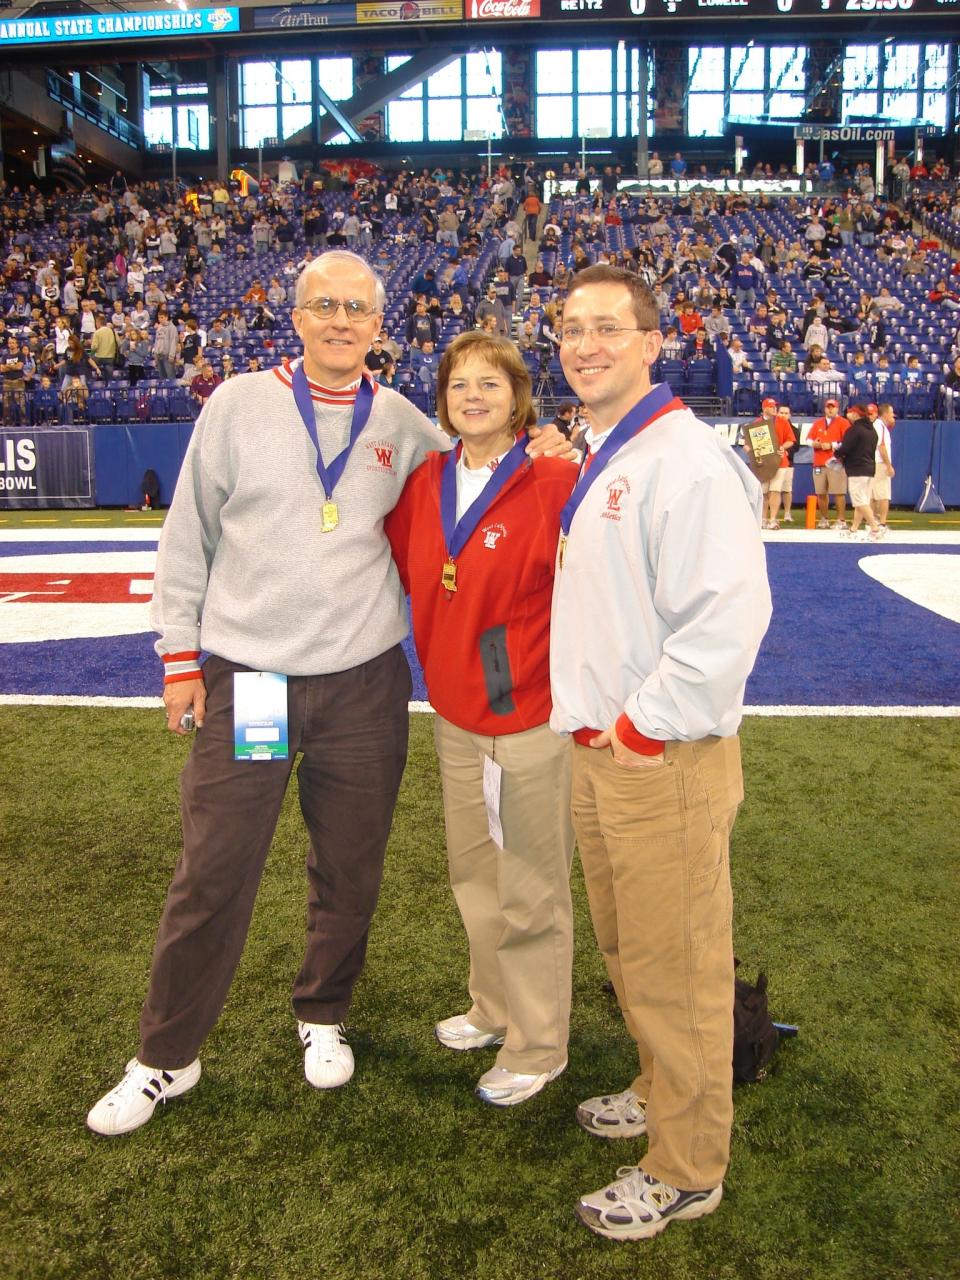 Marion Vruggink at the 2009 Class 3A state championship.